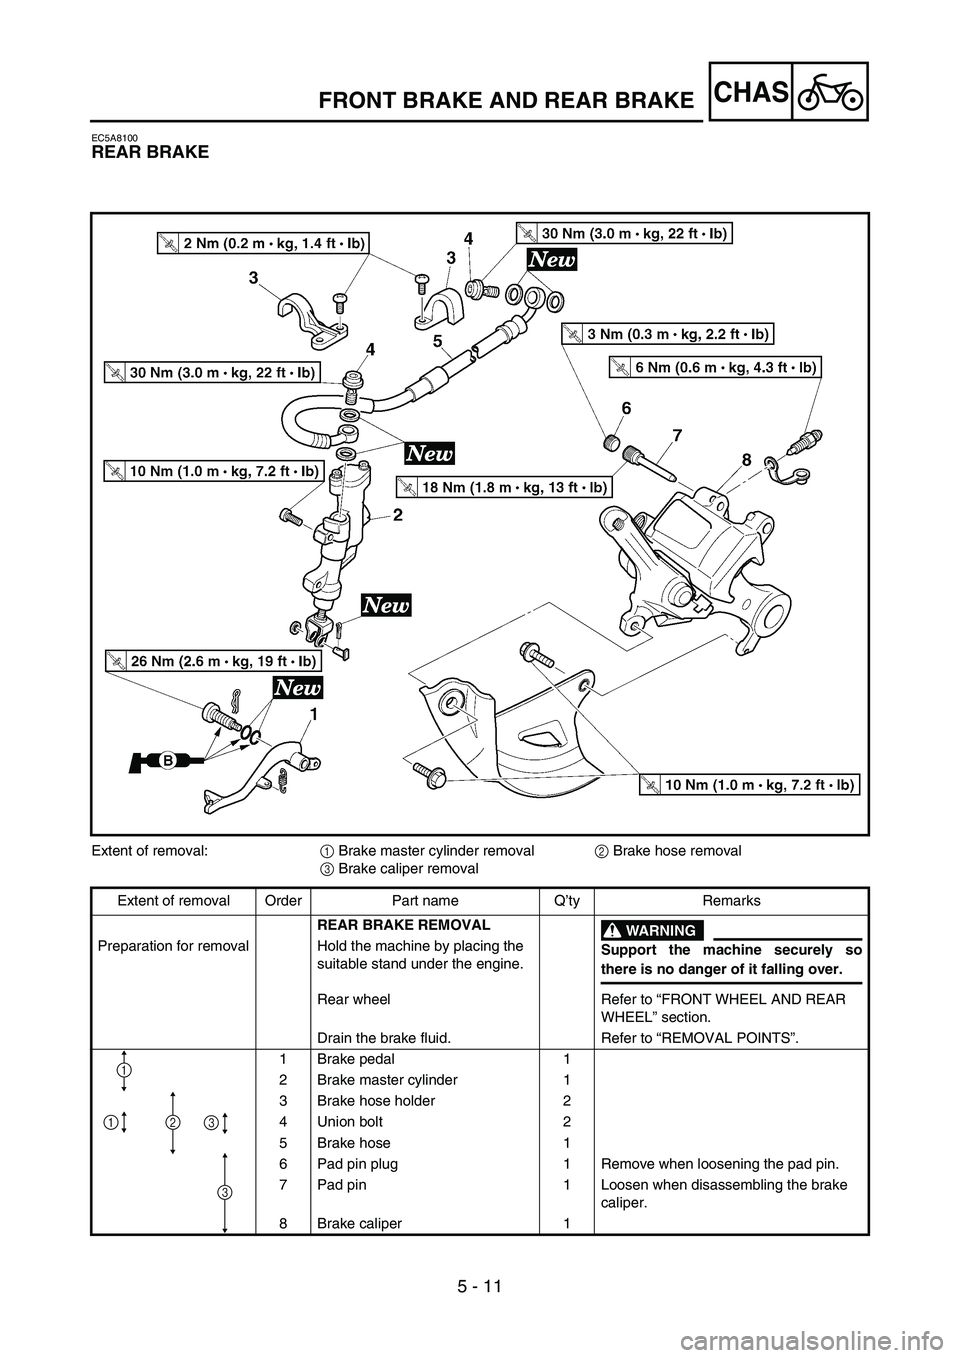 YAMAHA YZ250F 2007 User Guide 5 - 11
CHAS
EC5A8100
REAR BRAKE
Extent of removal:
1 Brake master cylinder removal
2 Brake hose removal
3 Brake caliper removal
Extent of removal Order Part name Q’ty Remarks
REAR BRAKE REMOVAL
WARN